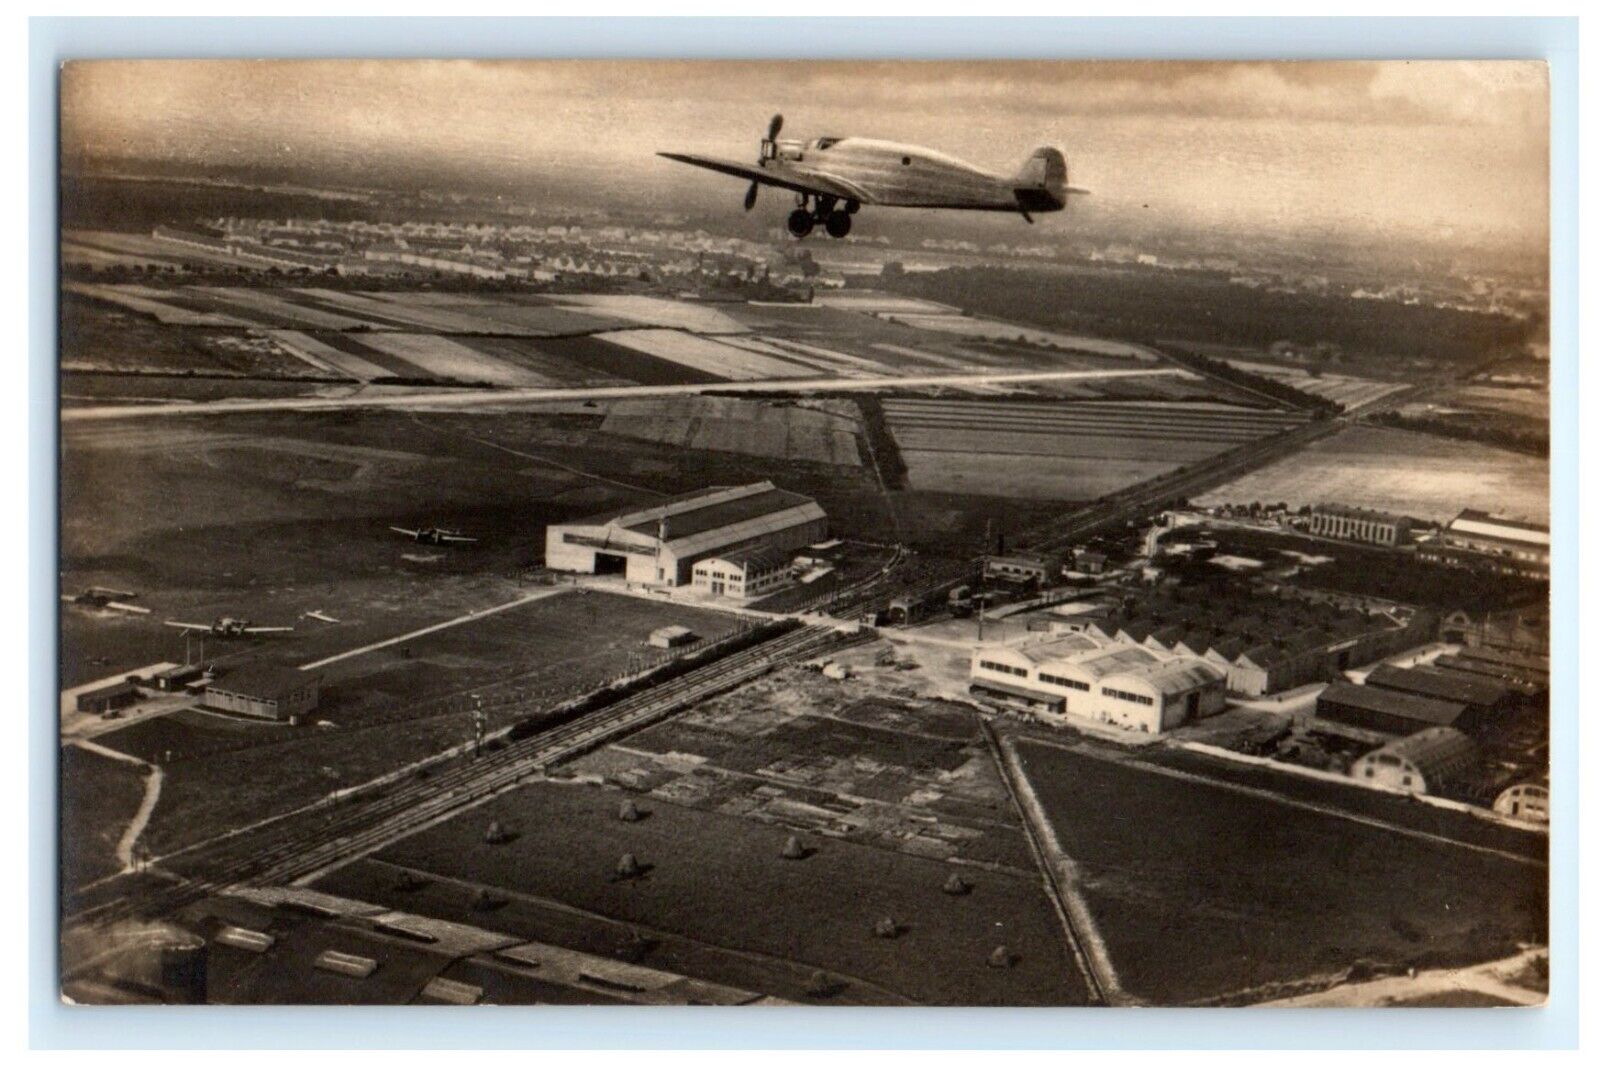 Airplane Over Junkers Works Dessau Germany Real Photo RPPC Postcard (FS8)